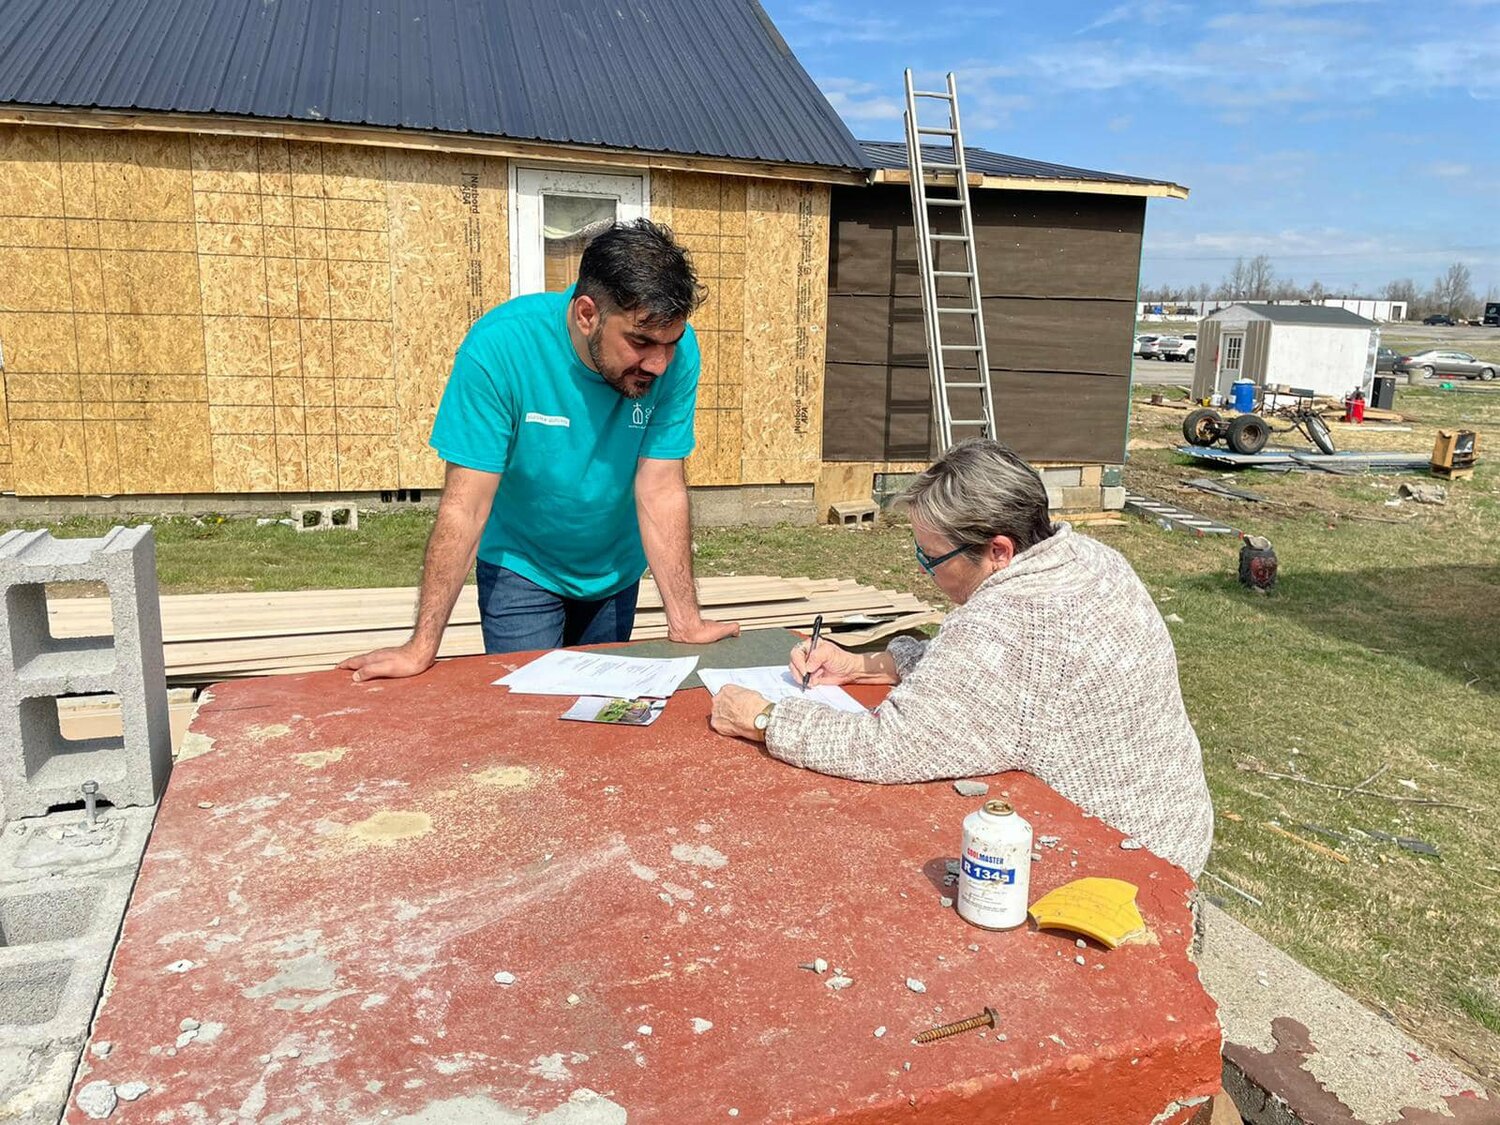 Khaibar Shafaq, a paralegal and case manager for Catholic Charities of the Diocese of Owensboro, Ky., works with Sheila Rose at the construction site of her home rebuild in Dawson Springs, Ky., March 15, 2022. Rose's home was completely destroyed by a tornado Dec. 10, 2021.